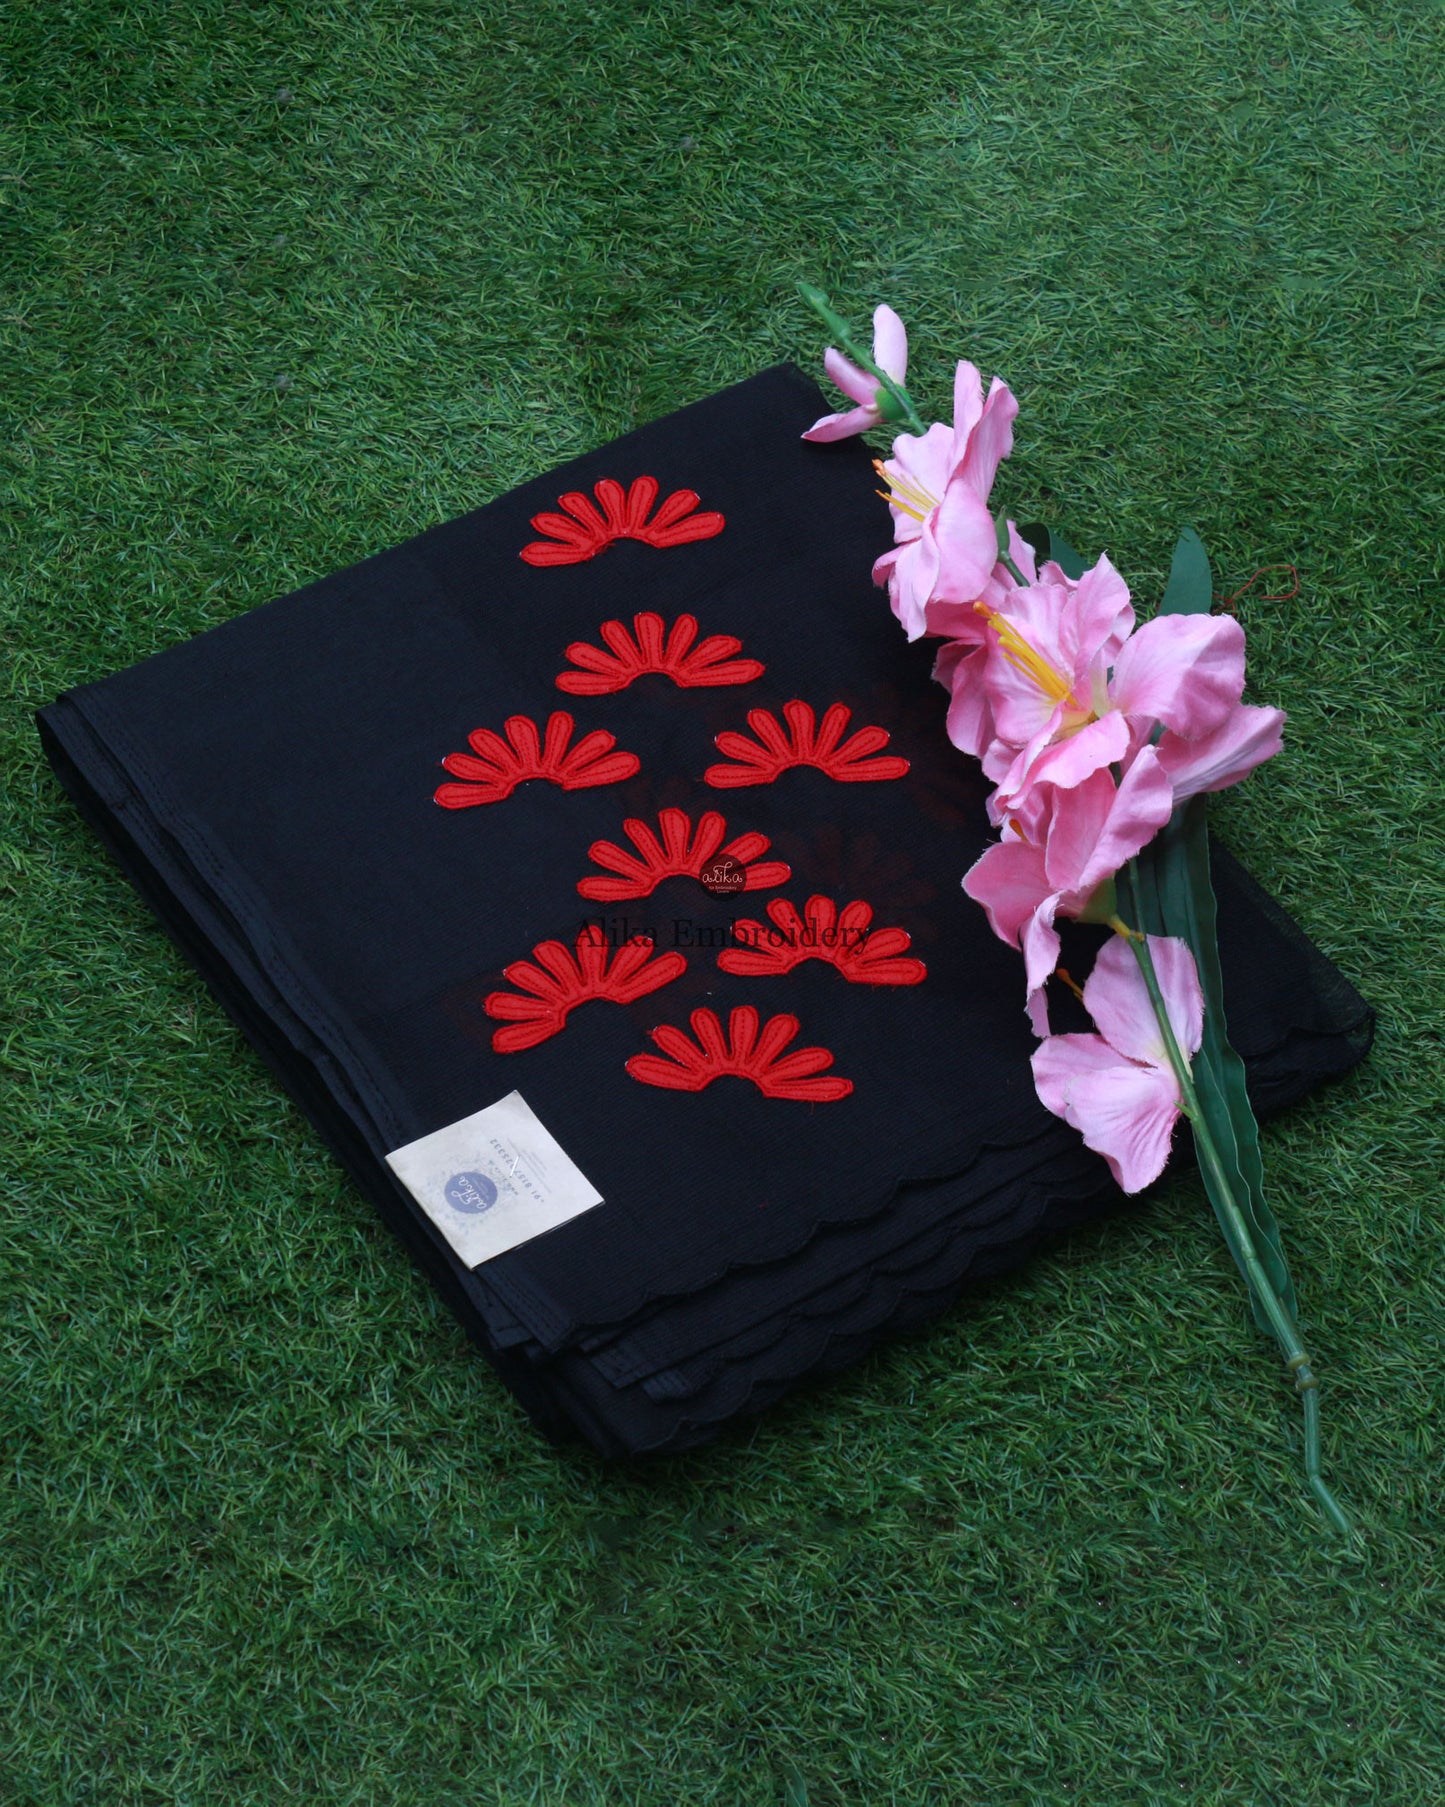 Exquisite Black Kota Saree with Red Floral Machine Embroidery | Bold Elegance